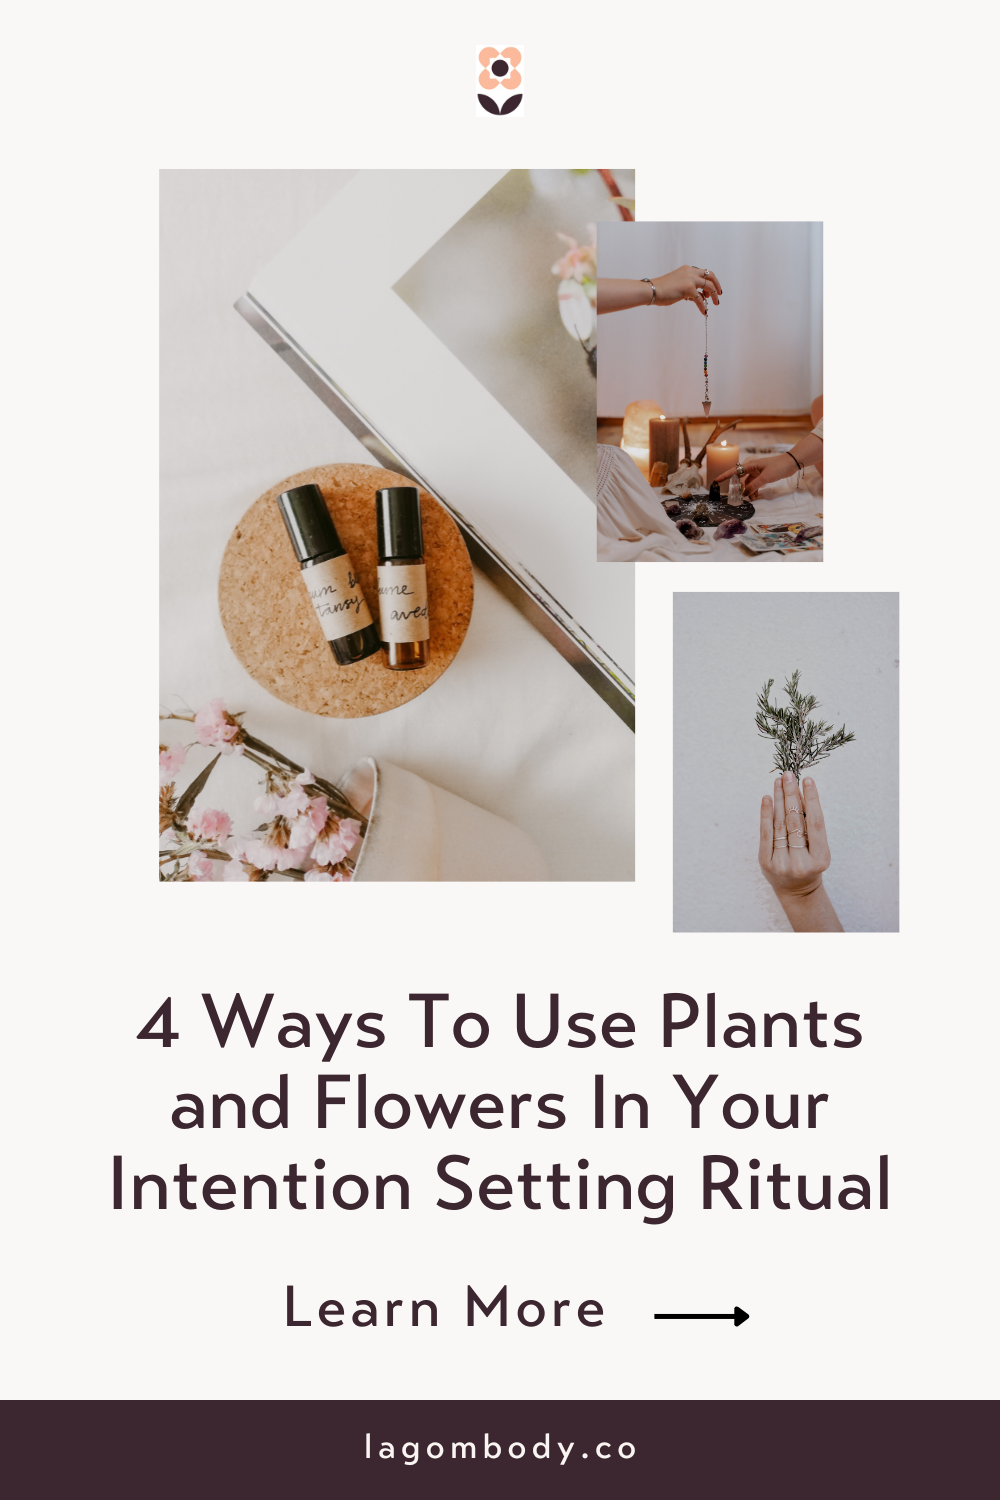 4 Ways To Use Plants and Flowers In Your Intention Setting Ritual